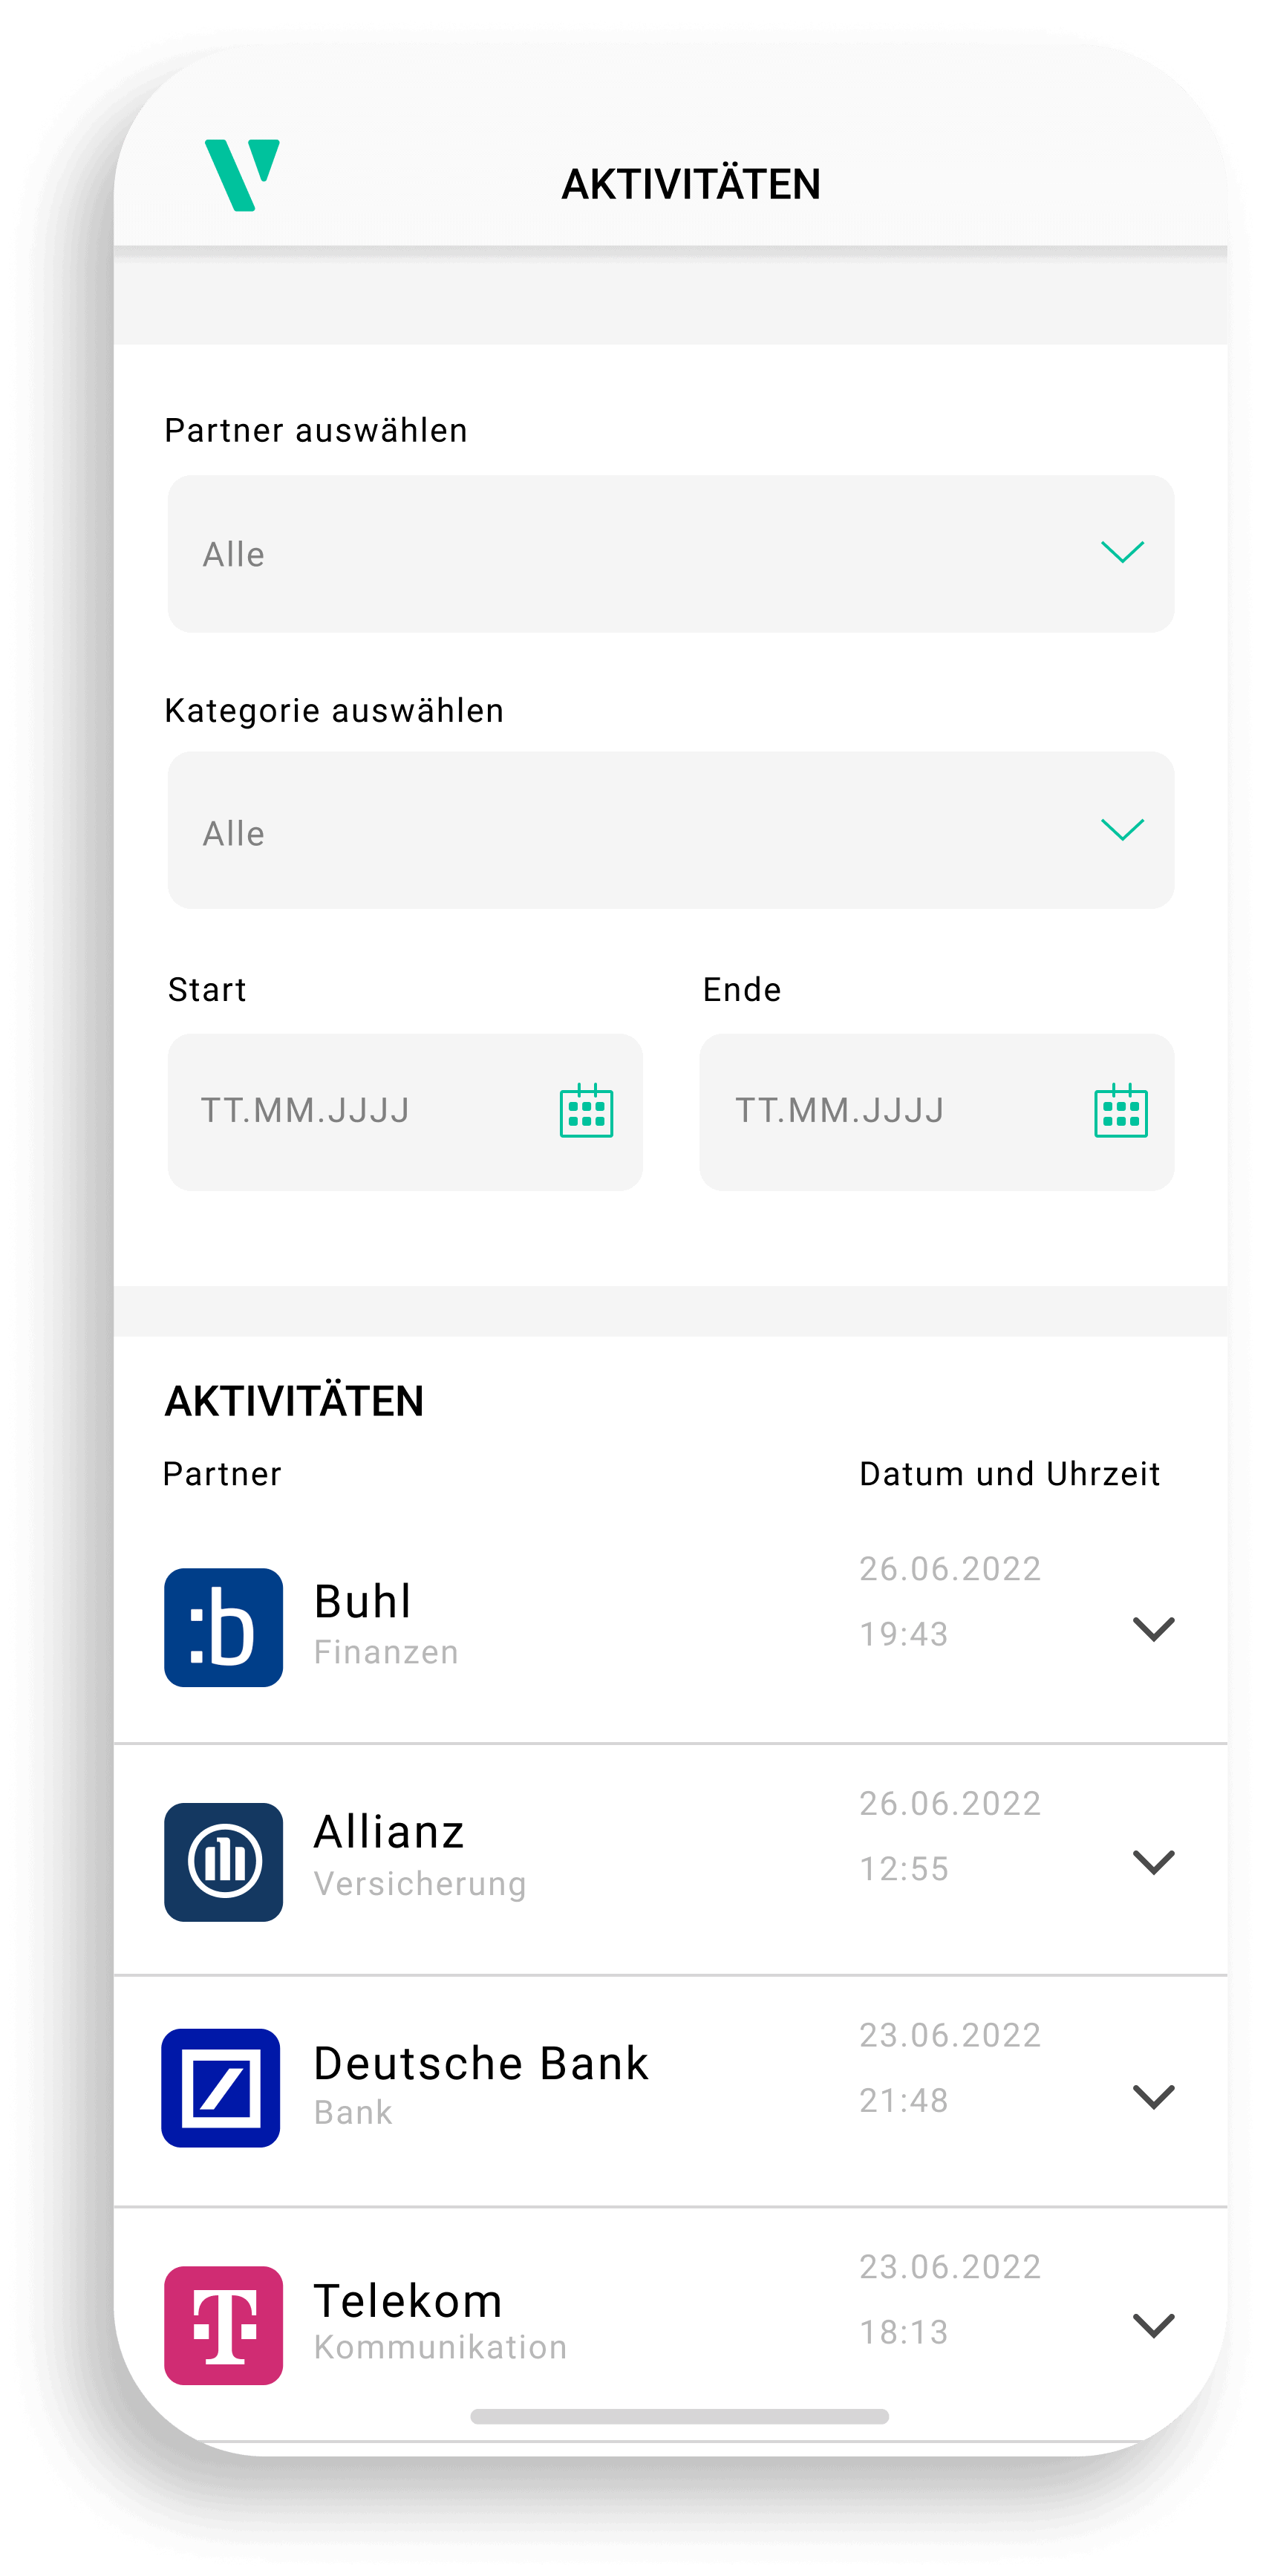 A screenshot from the Verimi ID Wallet App showing recent activities within the App